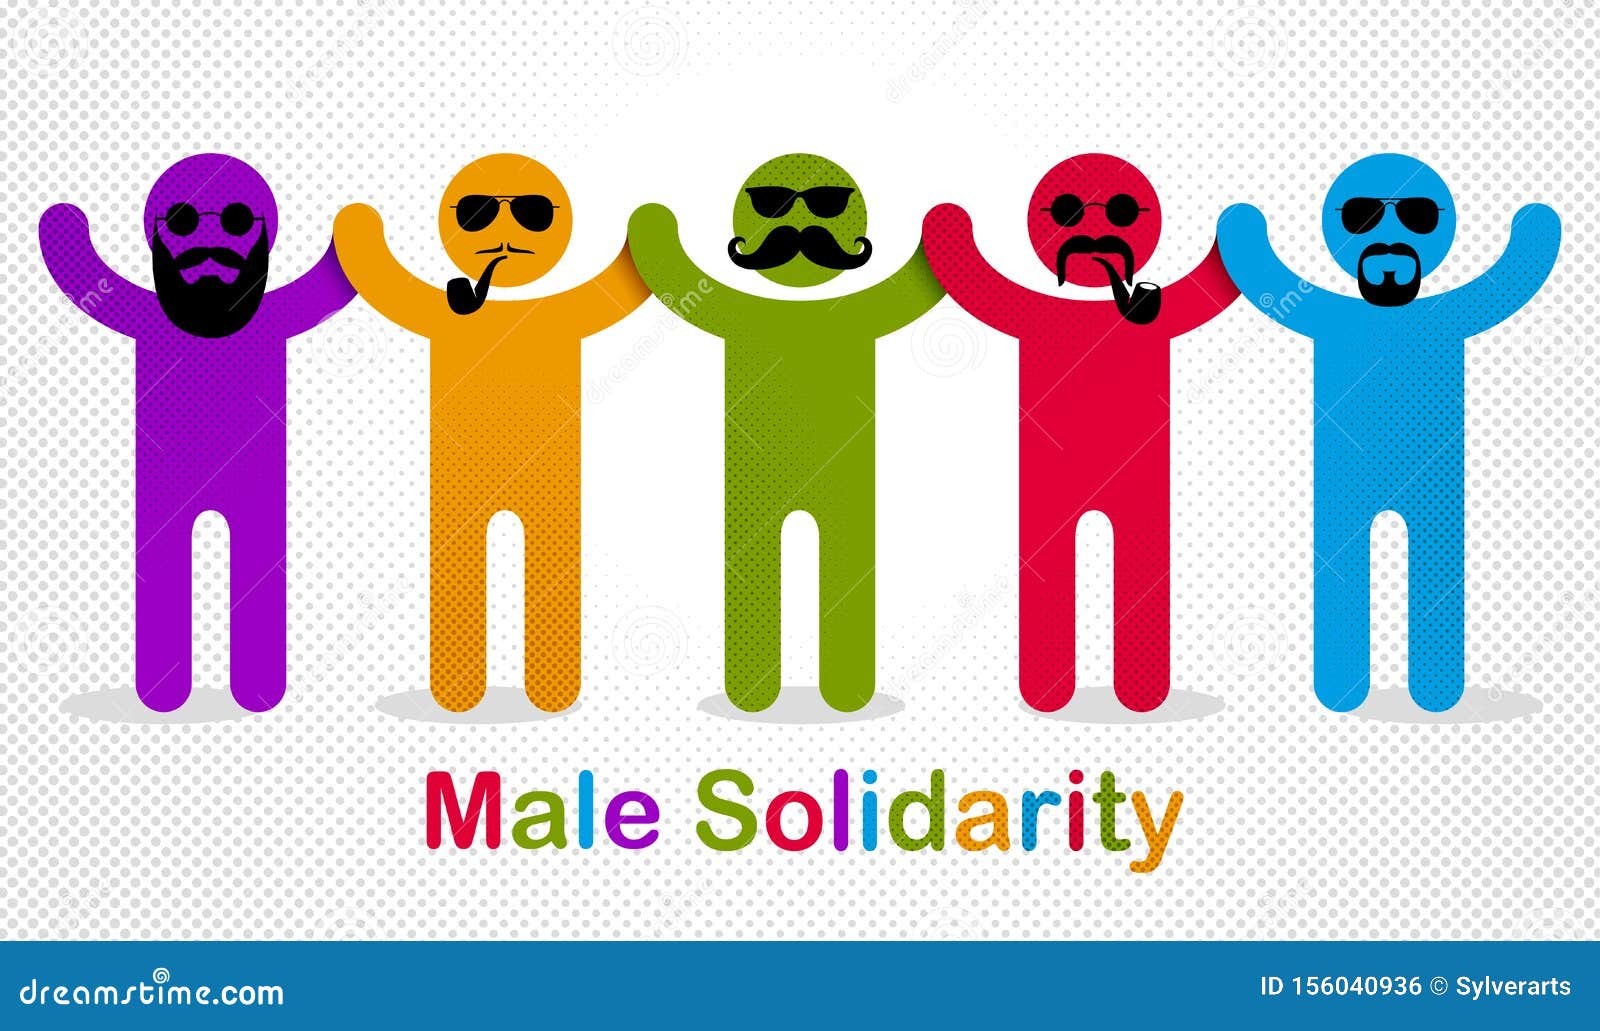 man day international holiday, gentleman club, male solidarity concept   icon or greeting